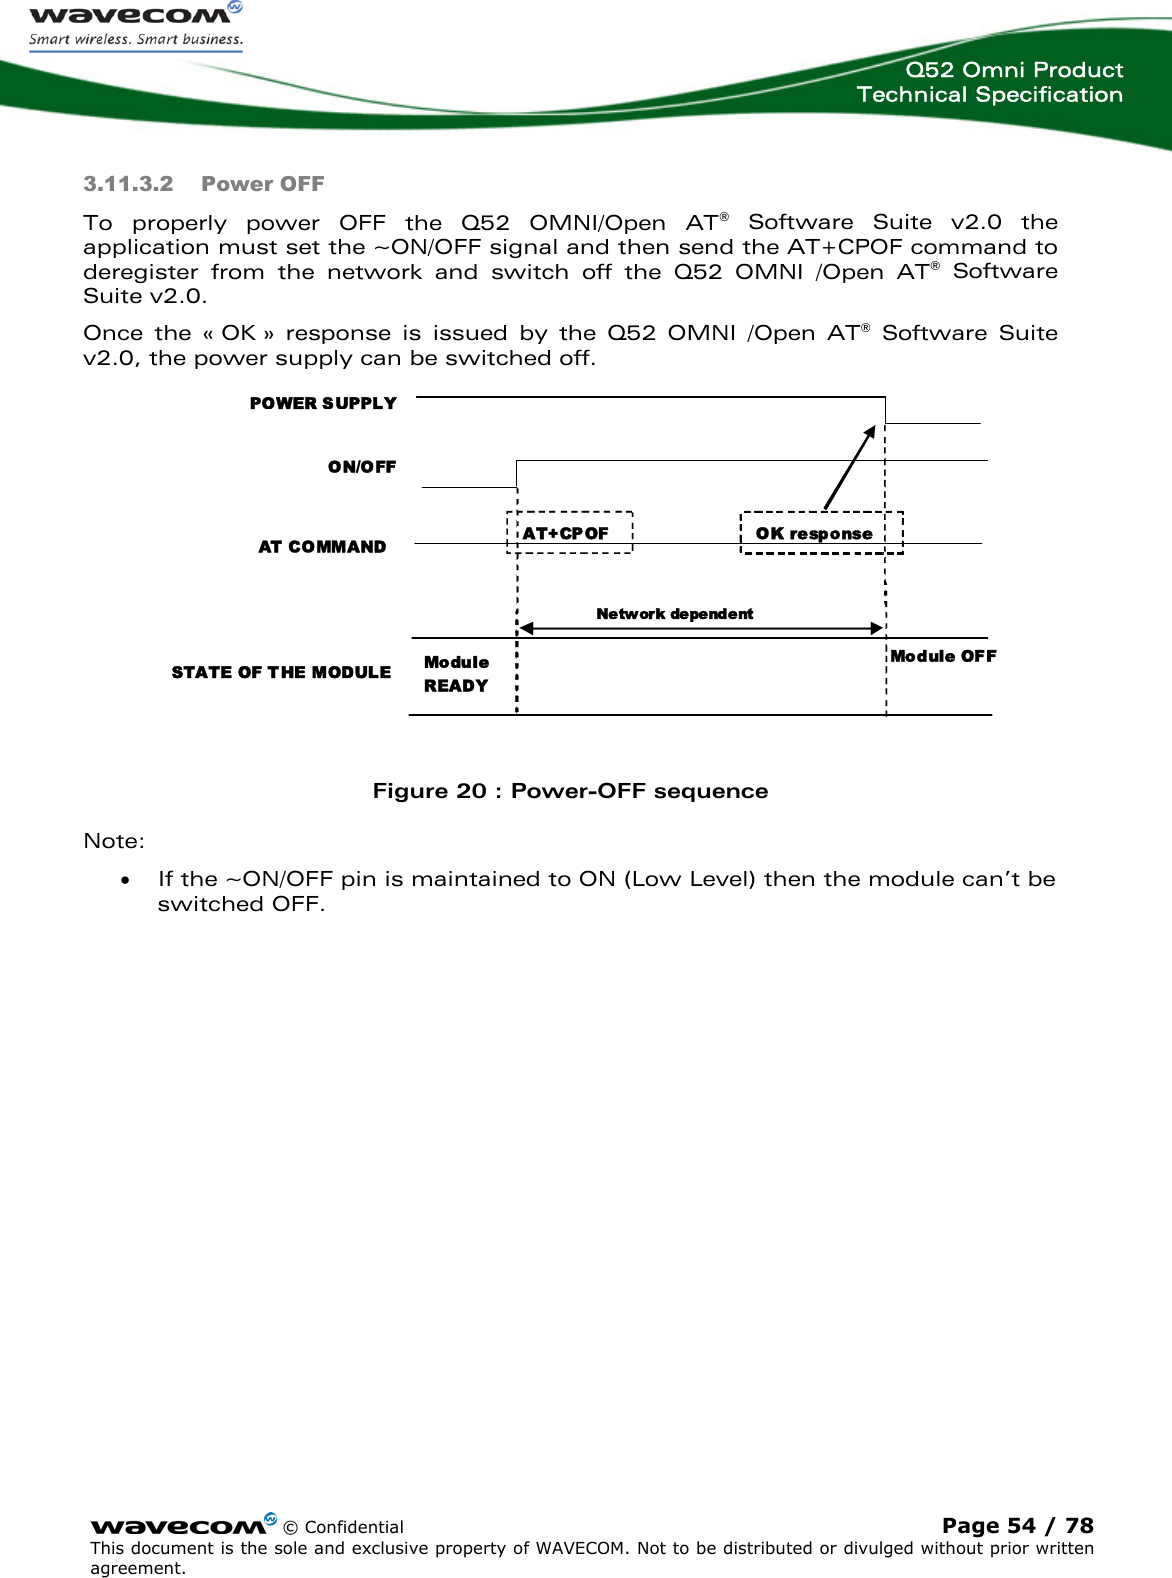  Q52 Omni Product Technical Specification    © Confidential Page 54 / 78 This document is the sole and exclusive property of WAVECOM. Not to be distributed or divulged without prior written agreement.  3.11.3.2 Power OFF To properly power OFF the Q52 OMNI/Open AT® Software Suite v2.0 the application must set the ~ON/OFF signal and then send the AT+CPOF command to deregister from the network and switch off the Q52 OMNI /Open AT® Software Suite v2.0.  Once the « OK » response is issued by the Q52 OMNI /Open AT® Software Suite v2.0, the power supply can be switched off. POWER SUPPLY ON/OFF AT COMMAND STATE OF T HE MODULE AT+CPOF Module READY Module OFF IBB + RF &lt;2 2µA Ne tw ork depe nd ent OK response IBB + R F  = overall current consumption (Base Band + RF part)   Figure 20 : Power-OFF sequence Note: • If the ~ON/OFF pin is maintained to ON (Low Level) then the module can’t be switched OFF. 